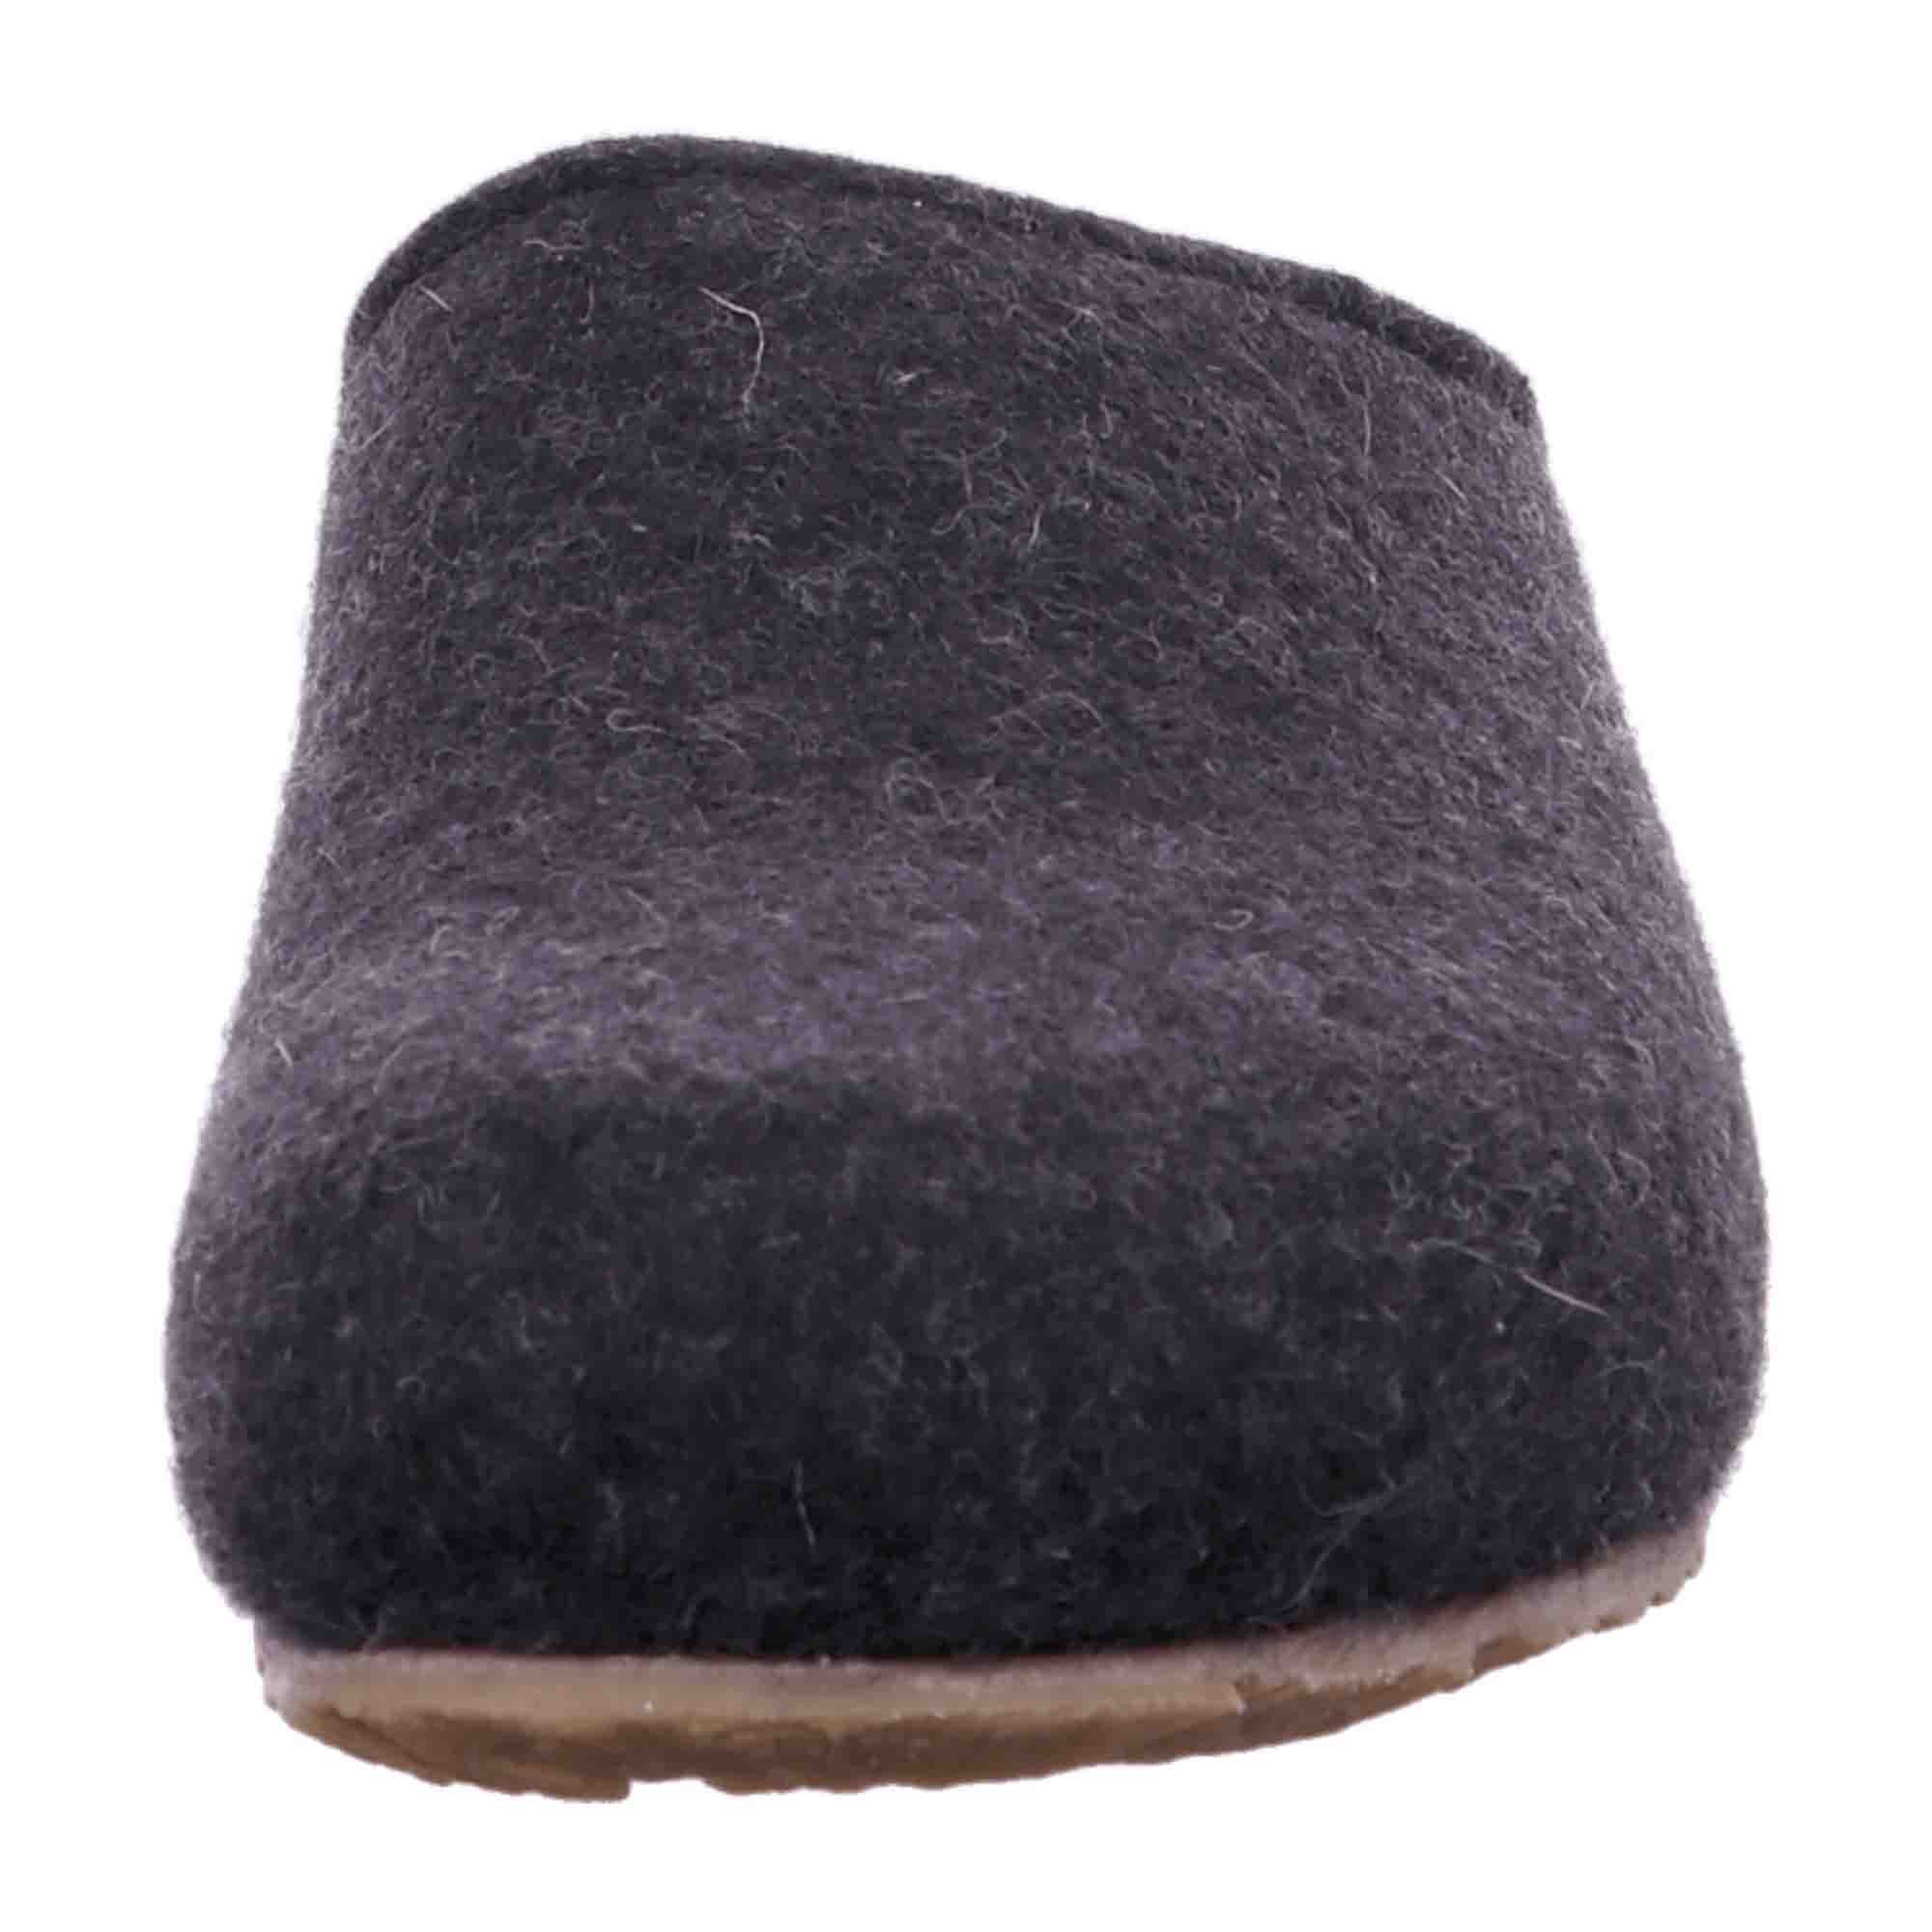 Haflinger Grizzly Michel Men's Slippers - Stylish Grey Wool Clogs